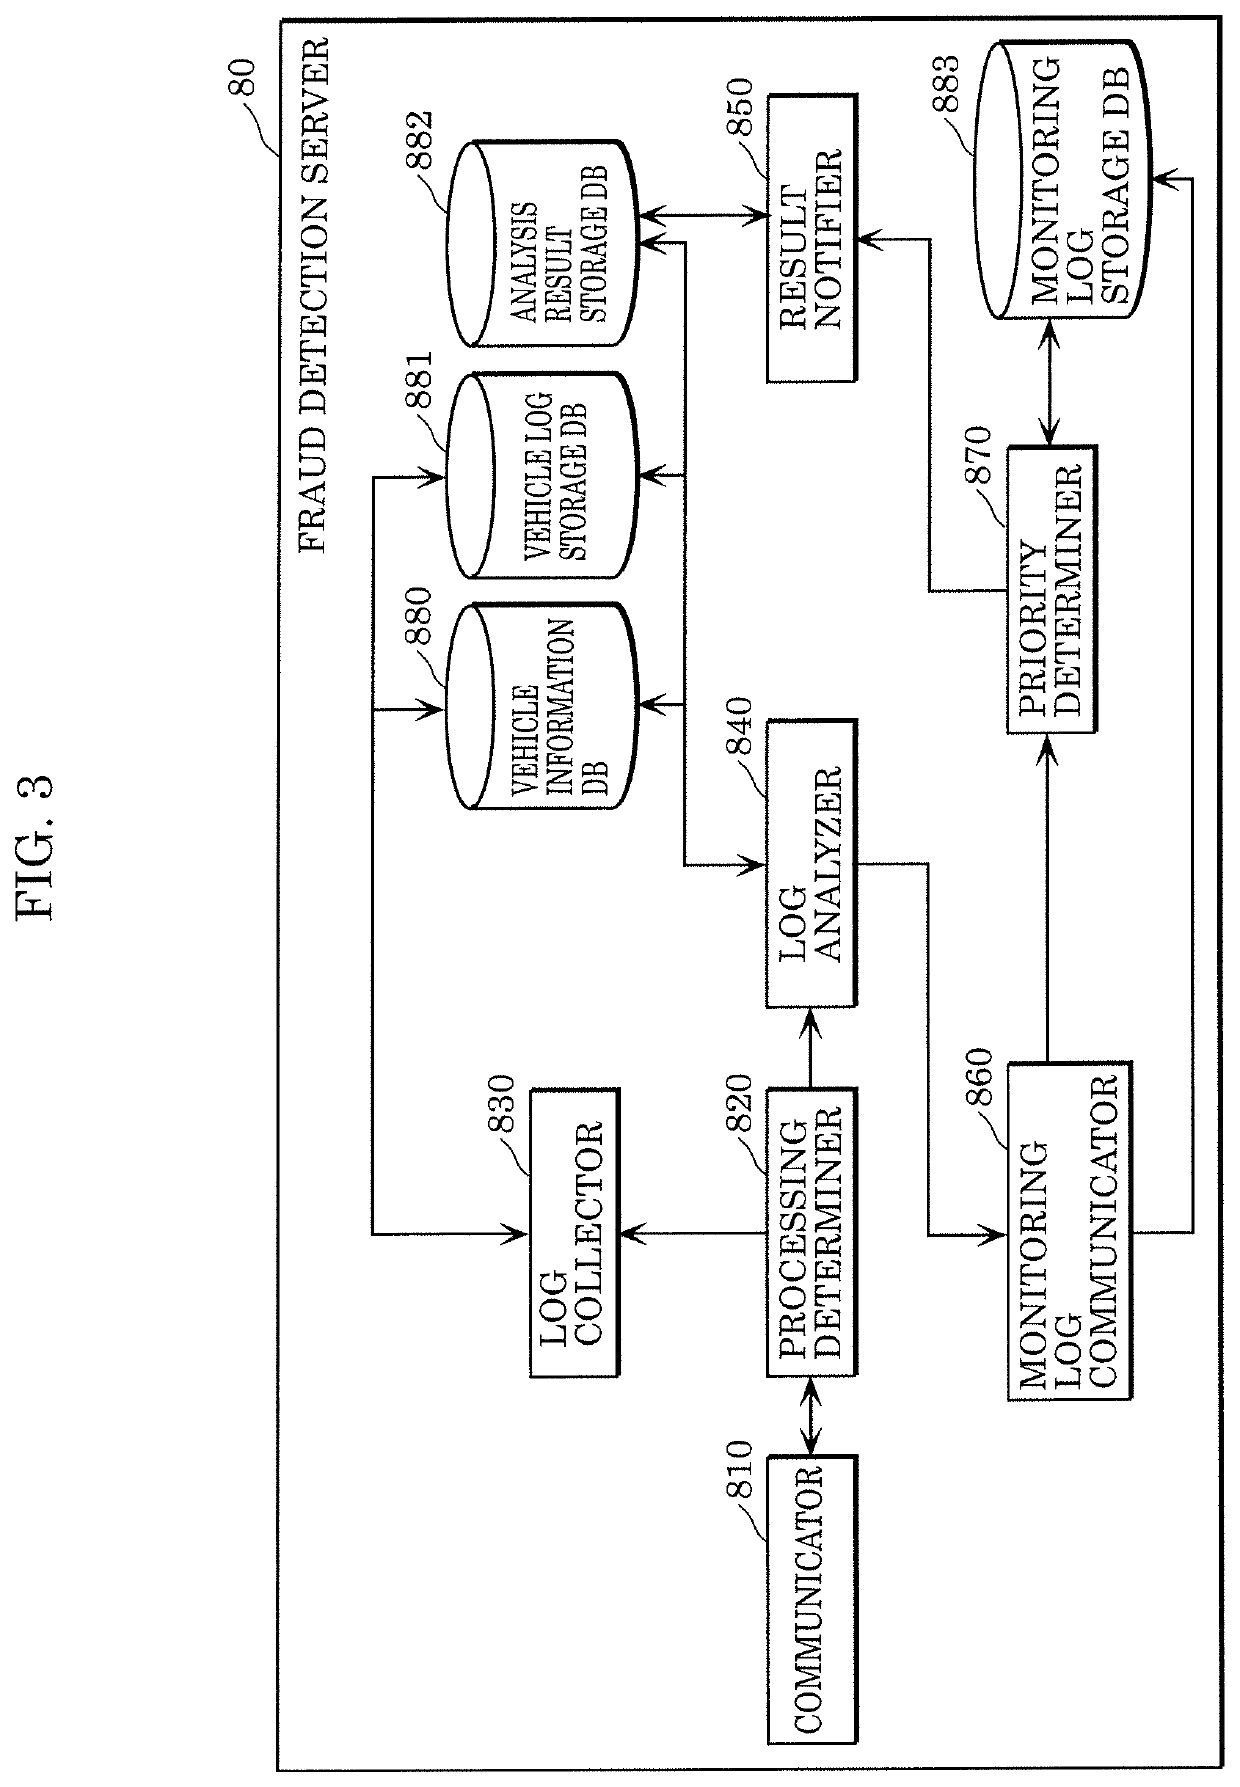 Vehicle monitoring apparatus, fraud detection server, and control methods